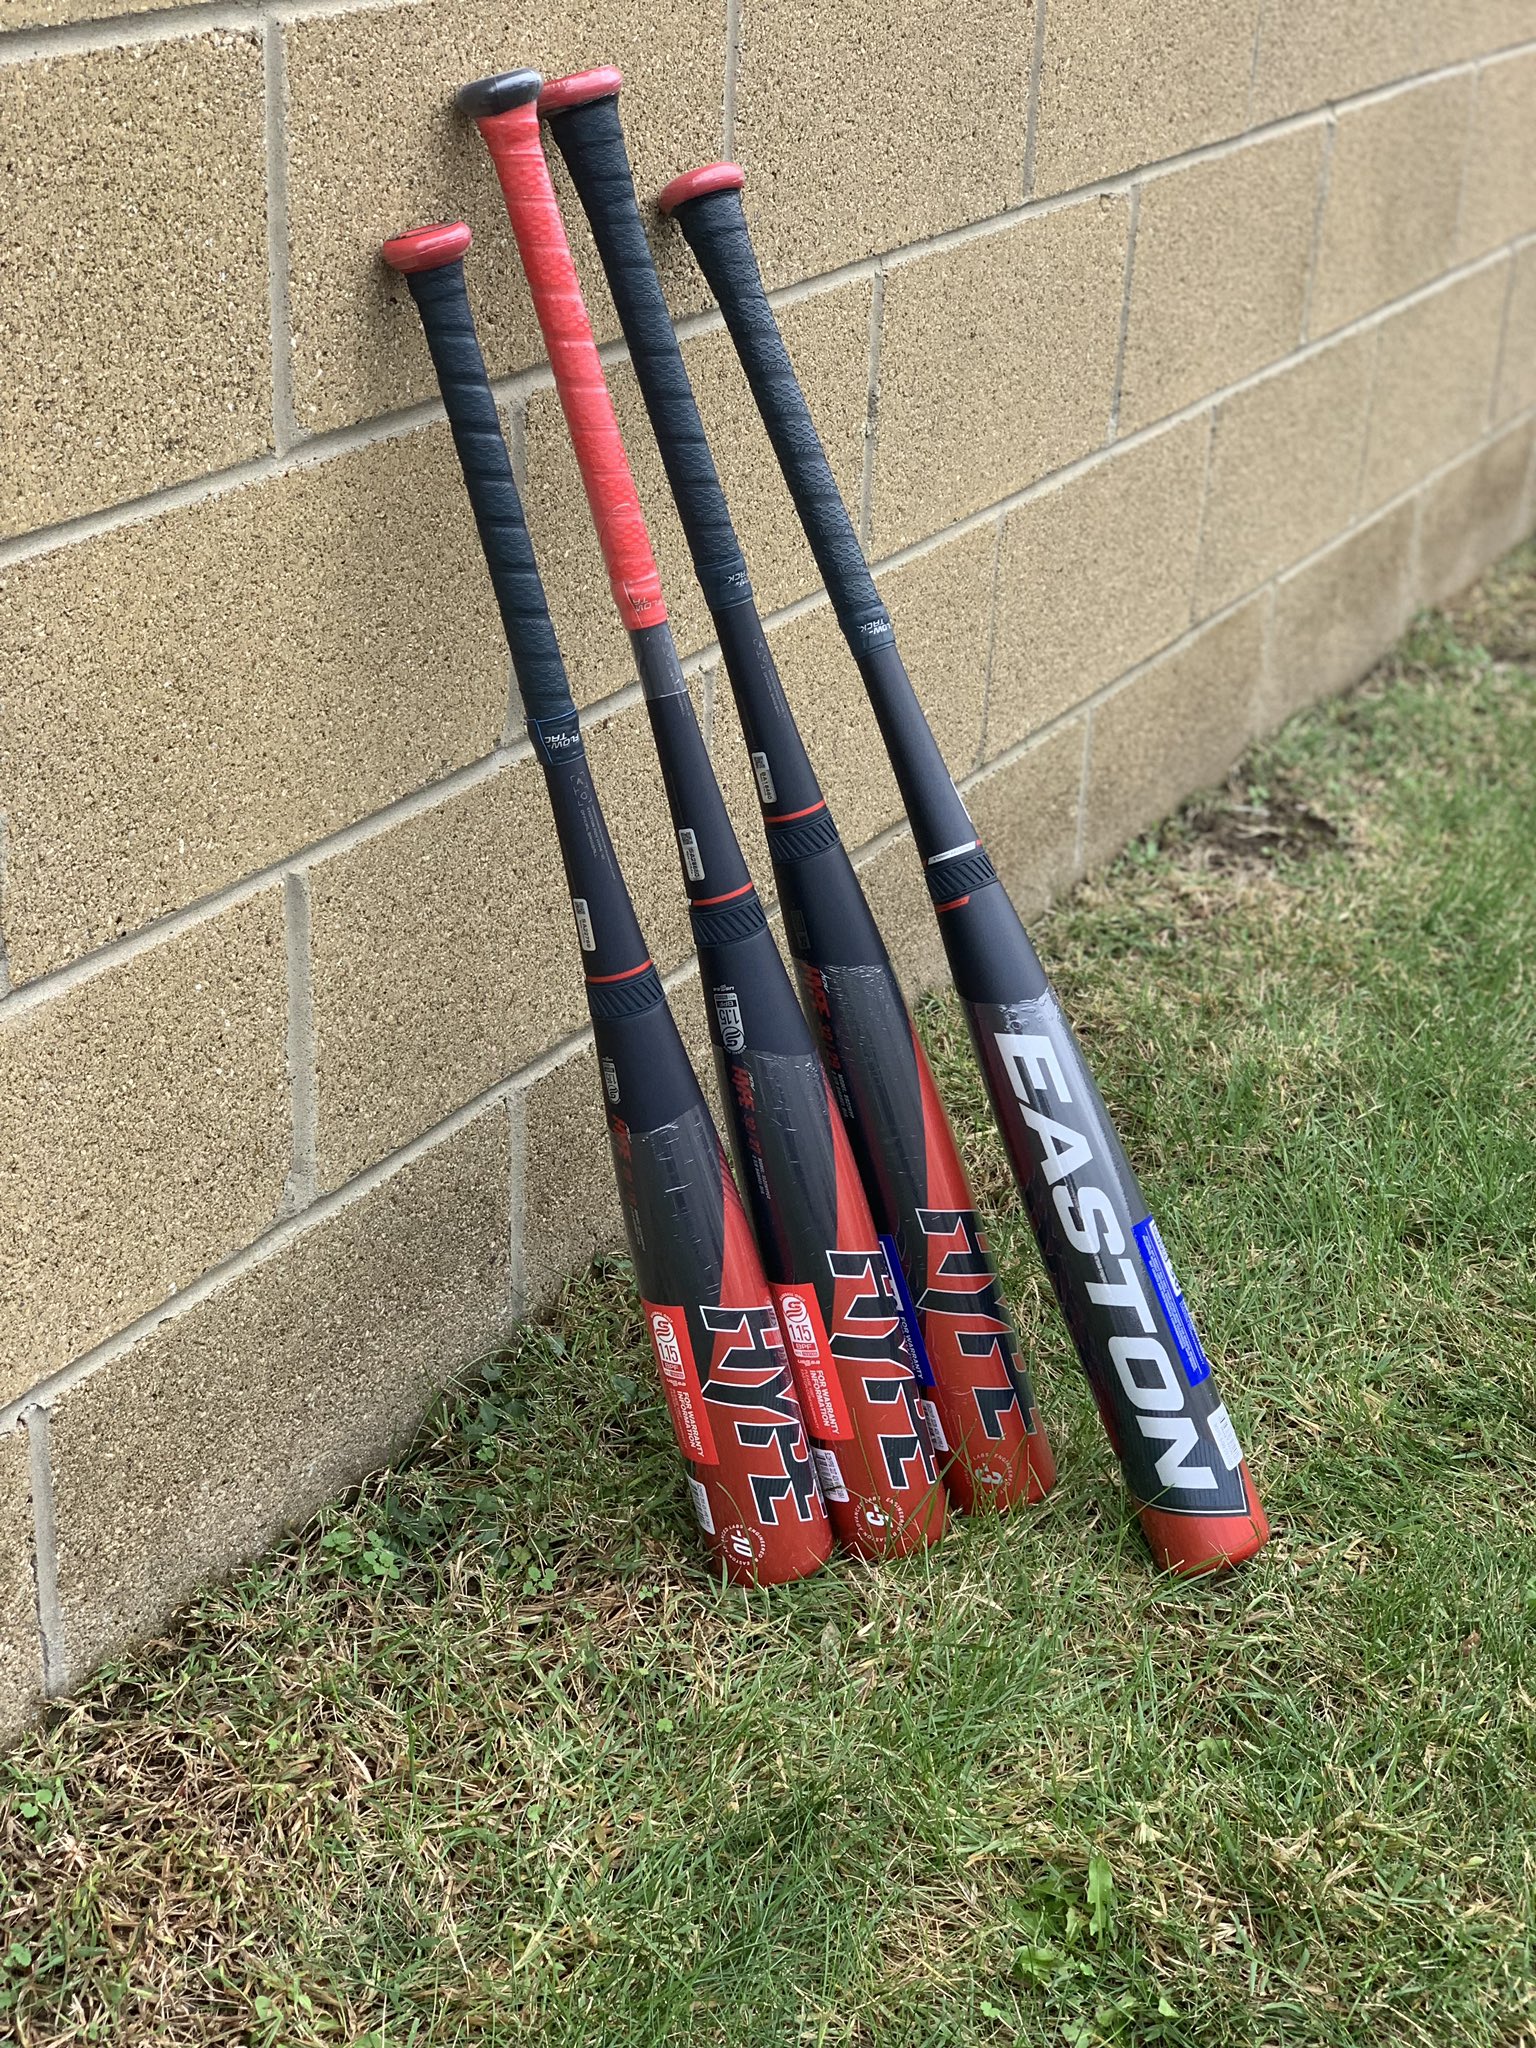 SPC Sports on X: Amazing reviews so far on the brand new Easton